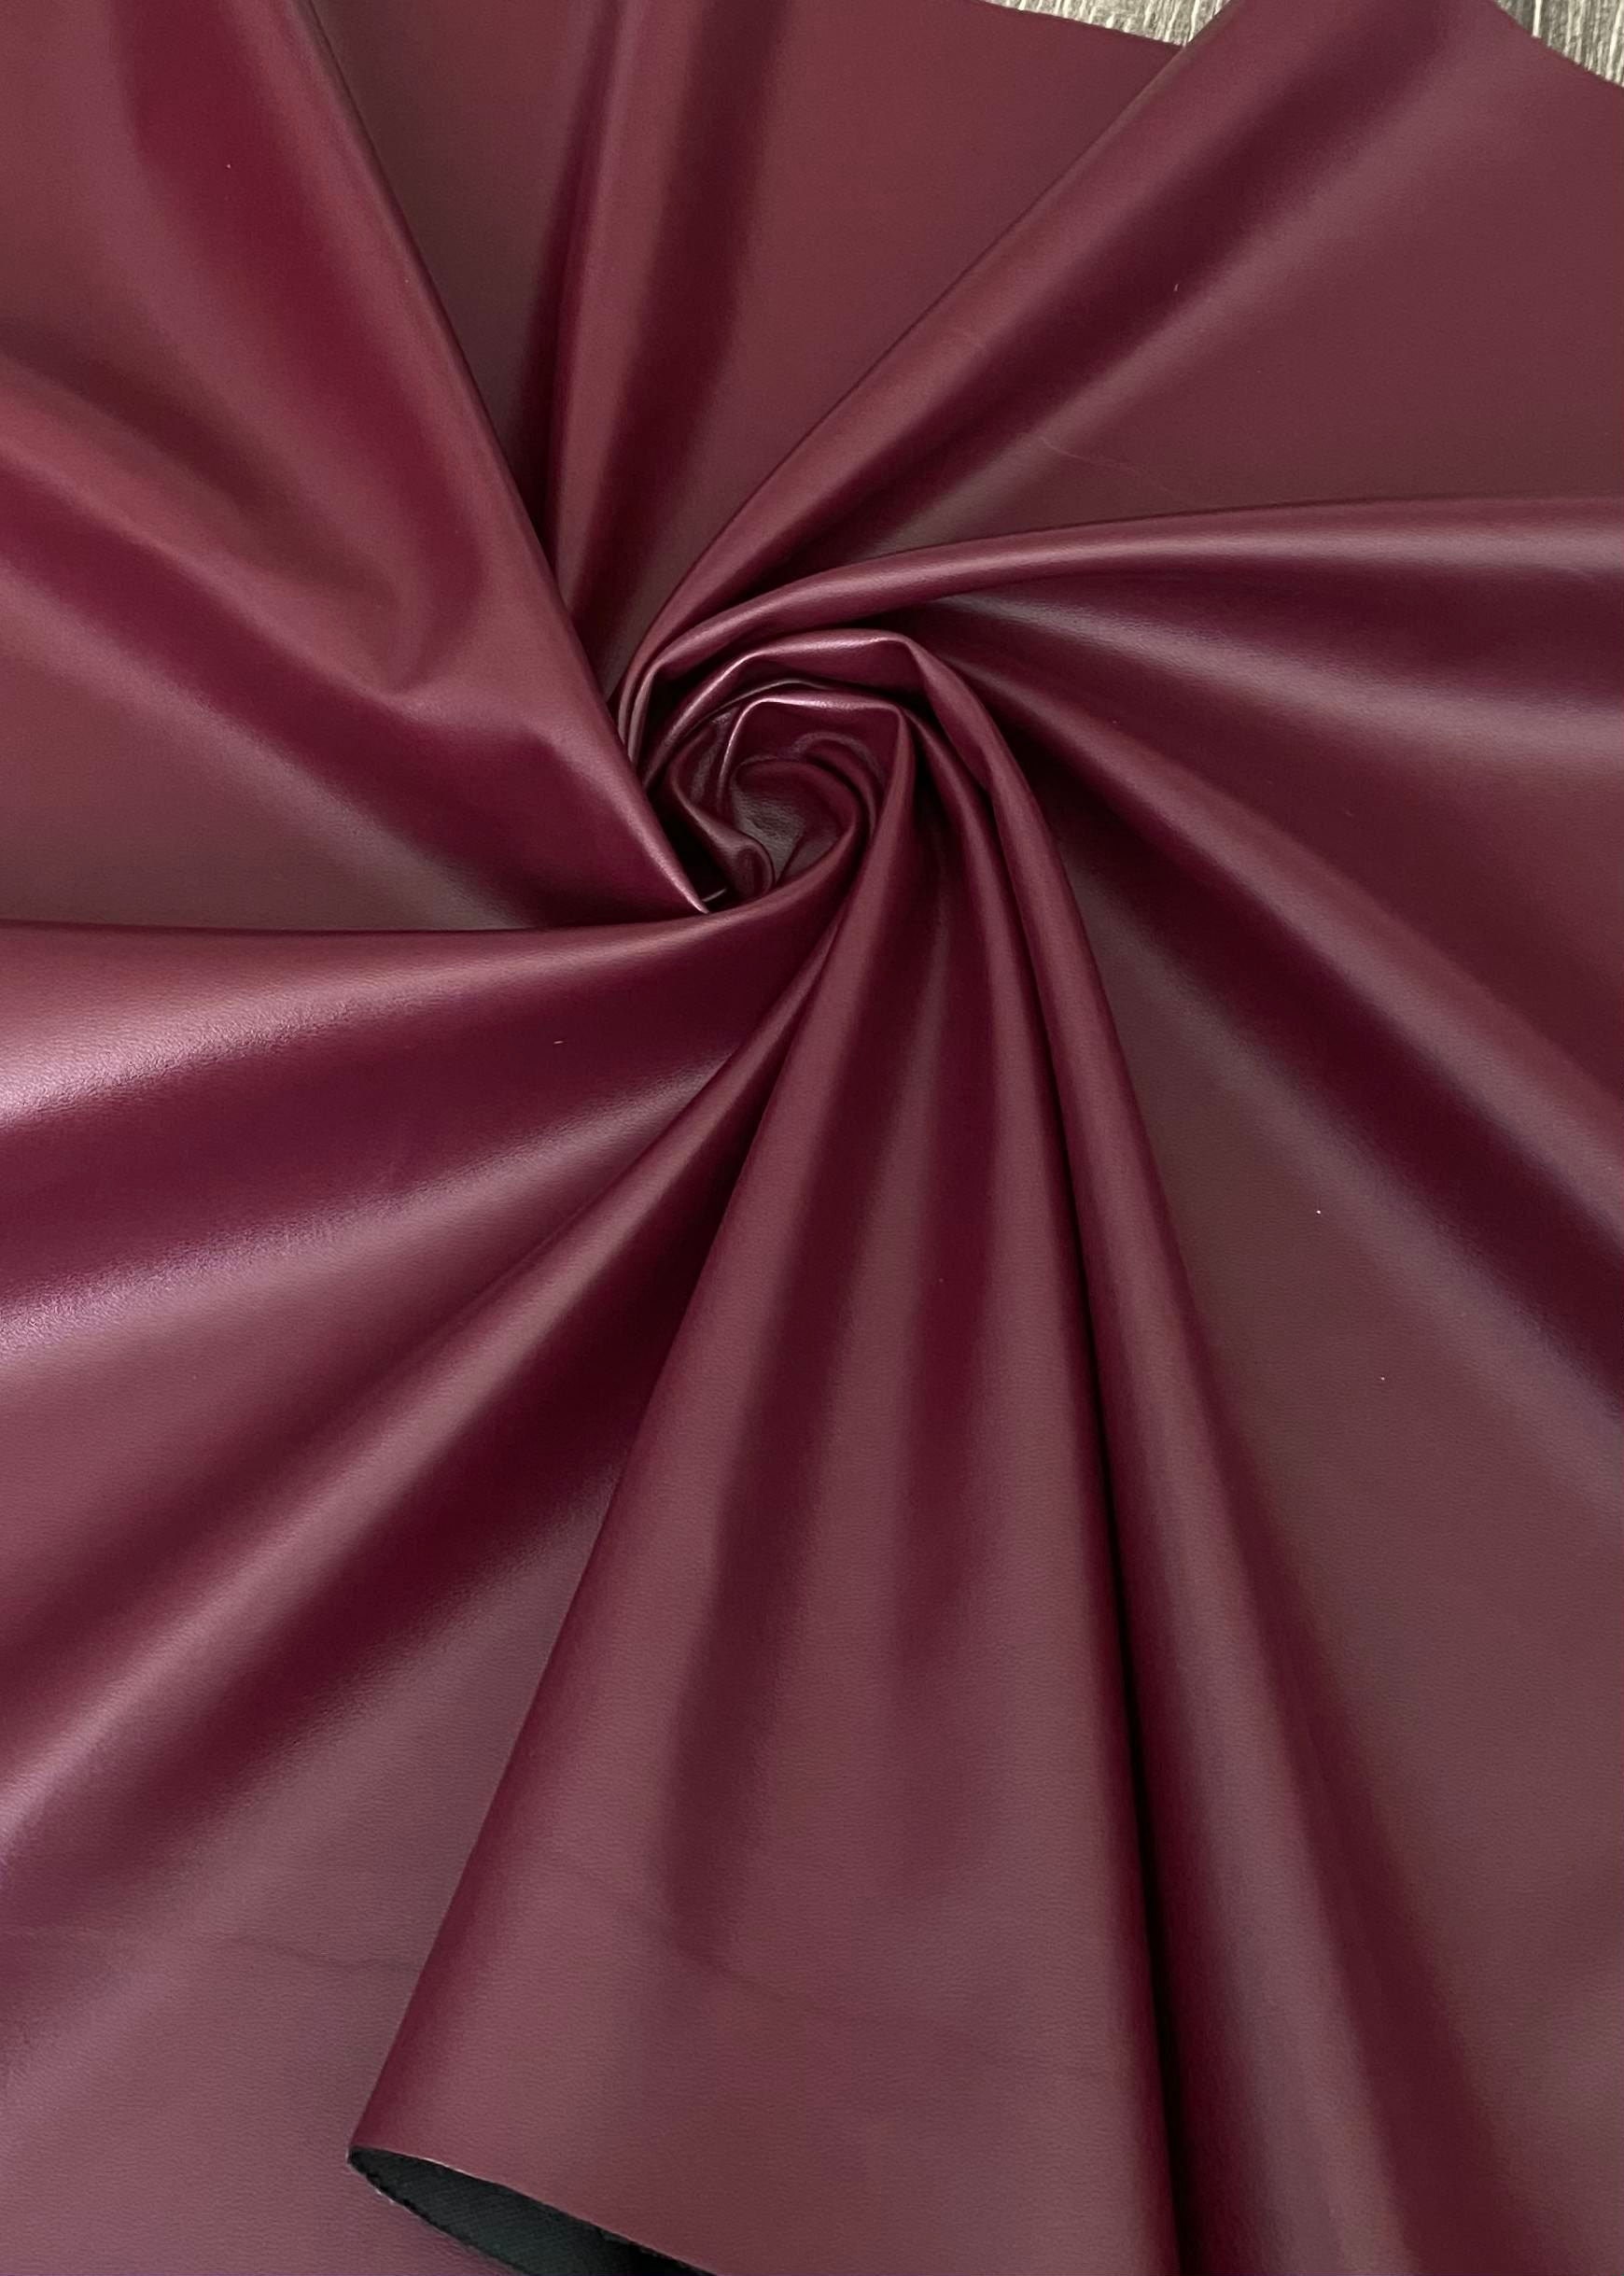 Faux Leather Fabric in Cow Leather Pattern - Maroon - Half Yard - Vegan  Leather - The Heyday Shop